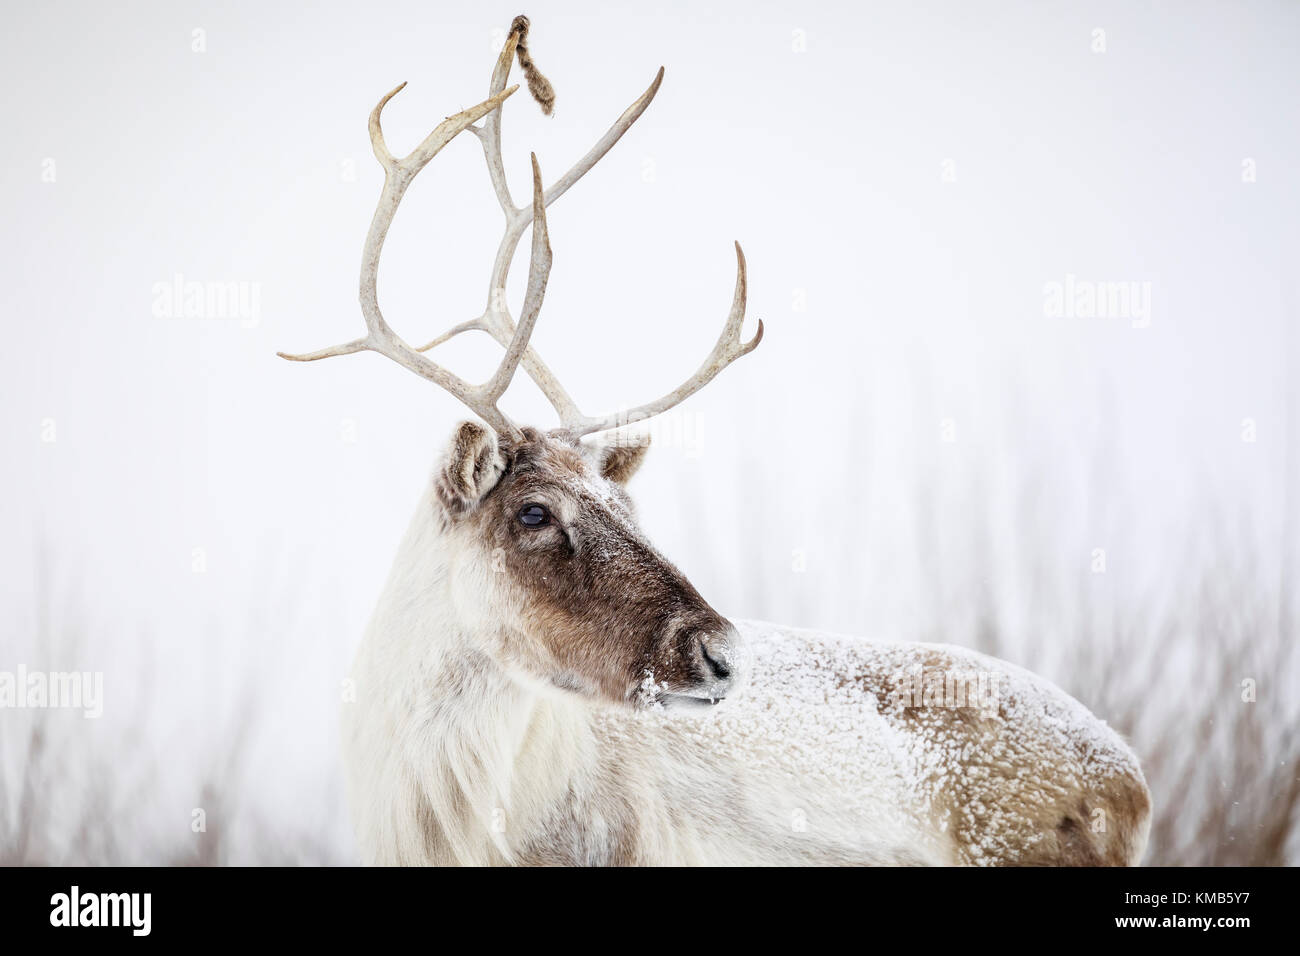 Reindeer, also known as the Boreal Woodland Caribou in North America, Rangifer tarandus, Manitoba, Canada. Stock Photo